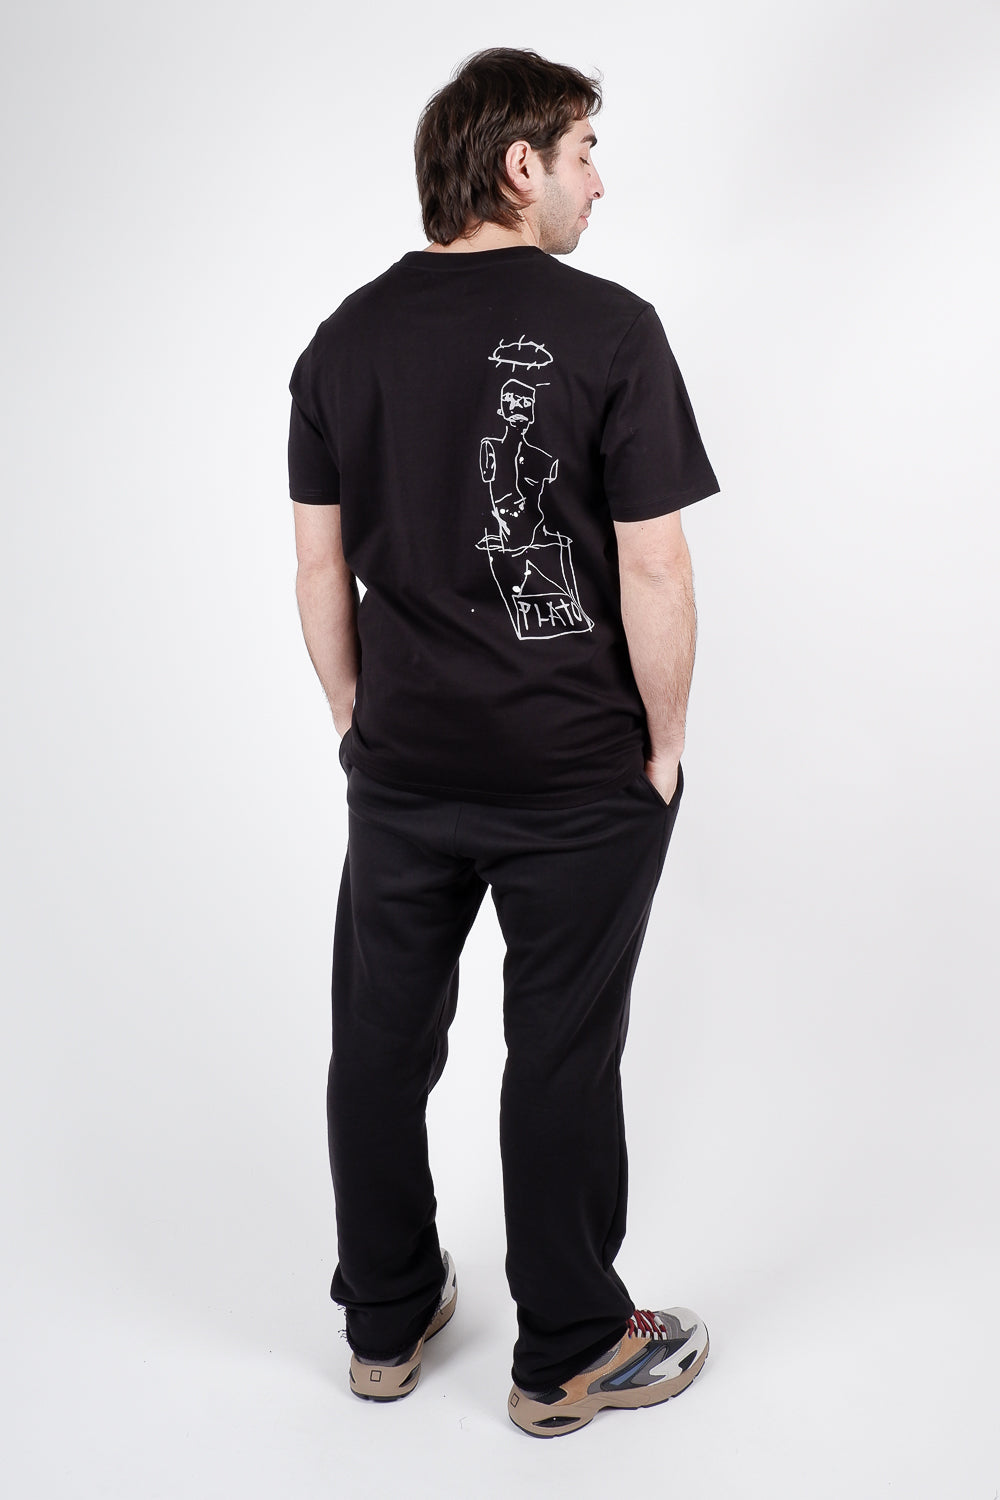 Buy the ABE Asphalt T-Shirt Black at Intro. Spend £50 for free UK delivery. Official stockists. We ship worldwide.